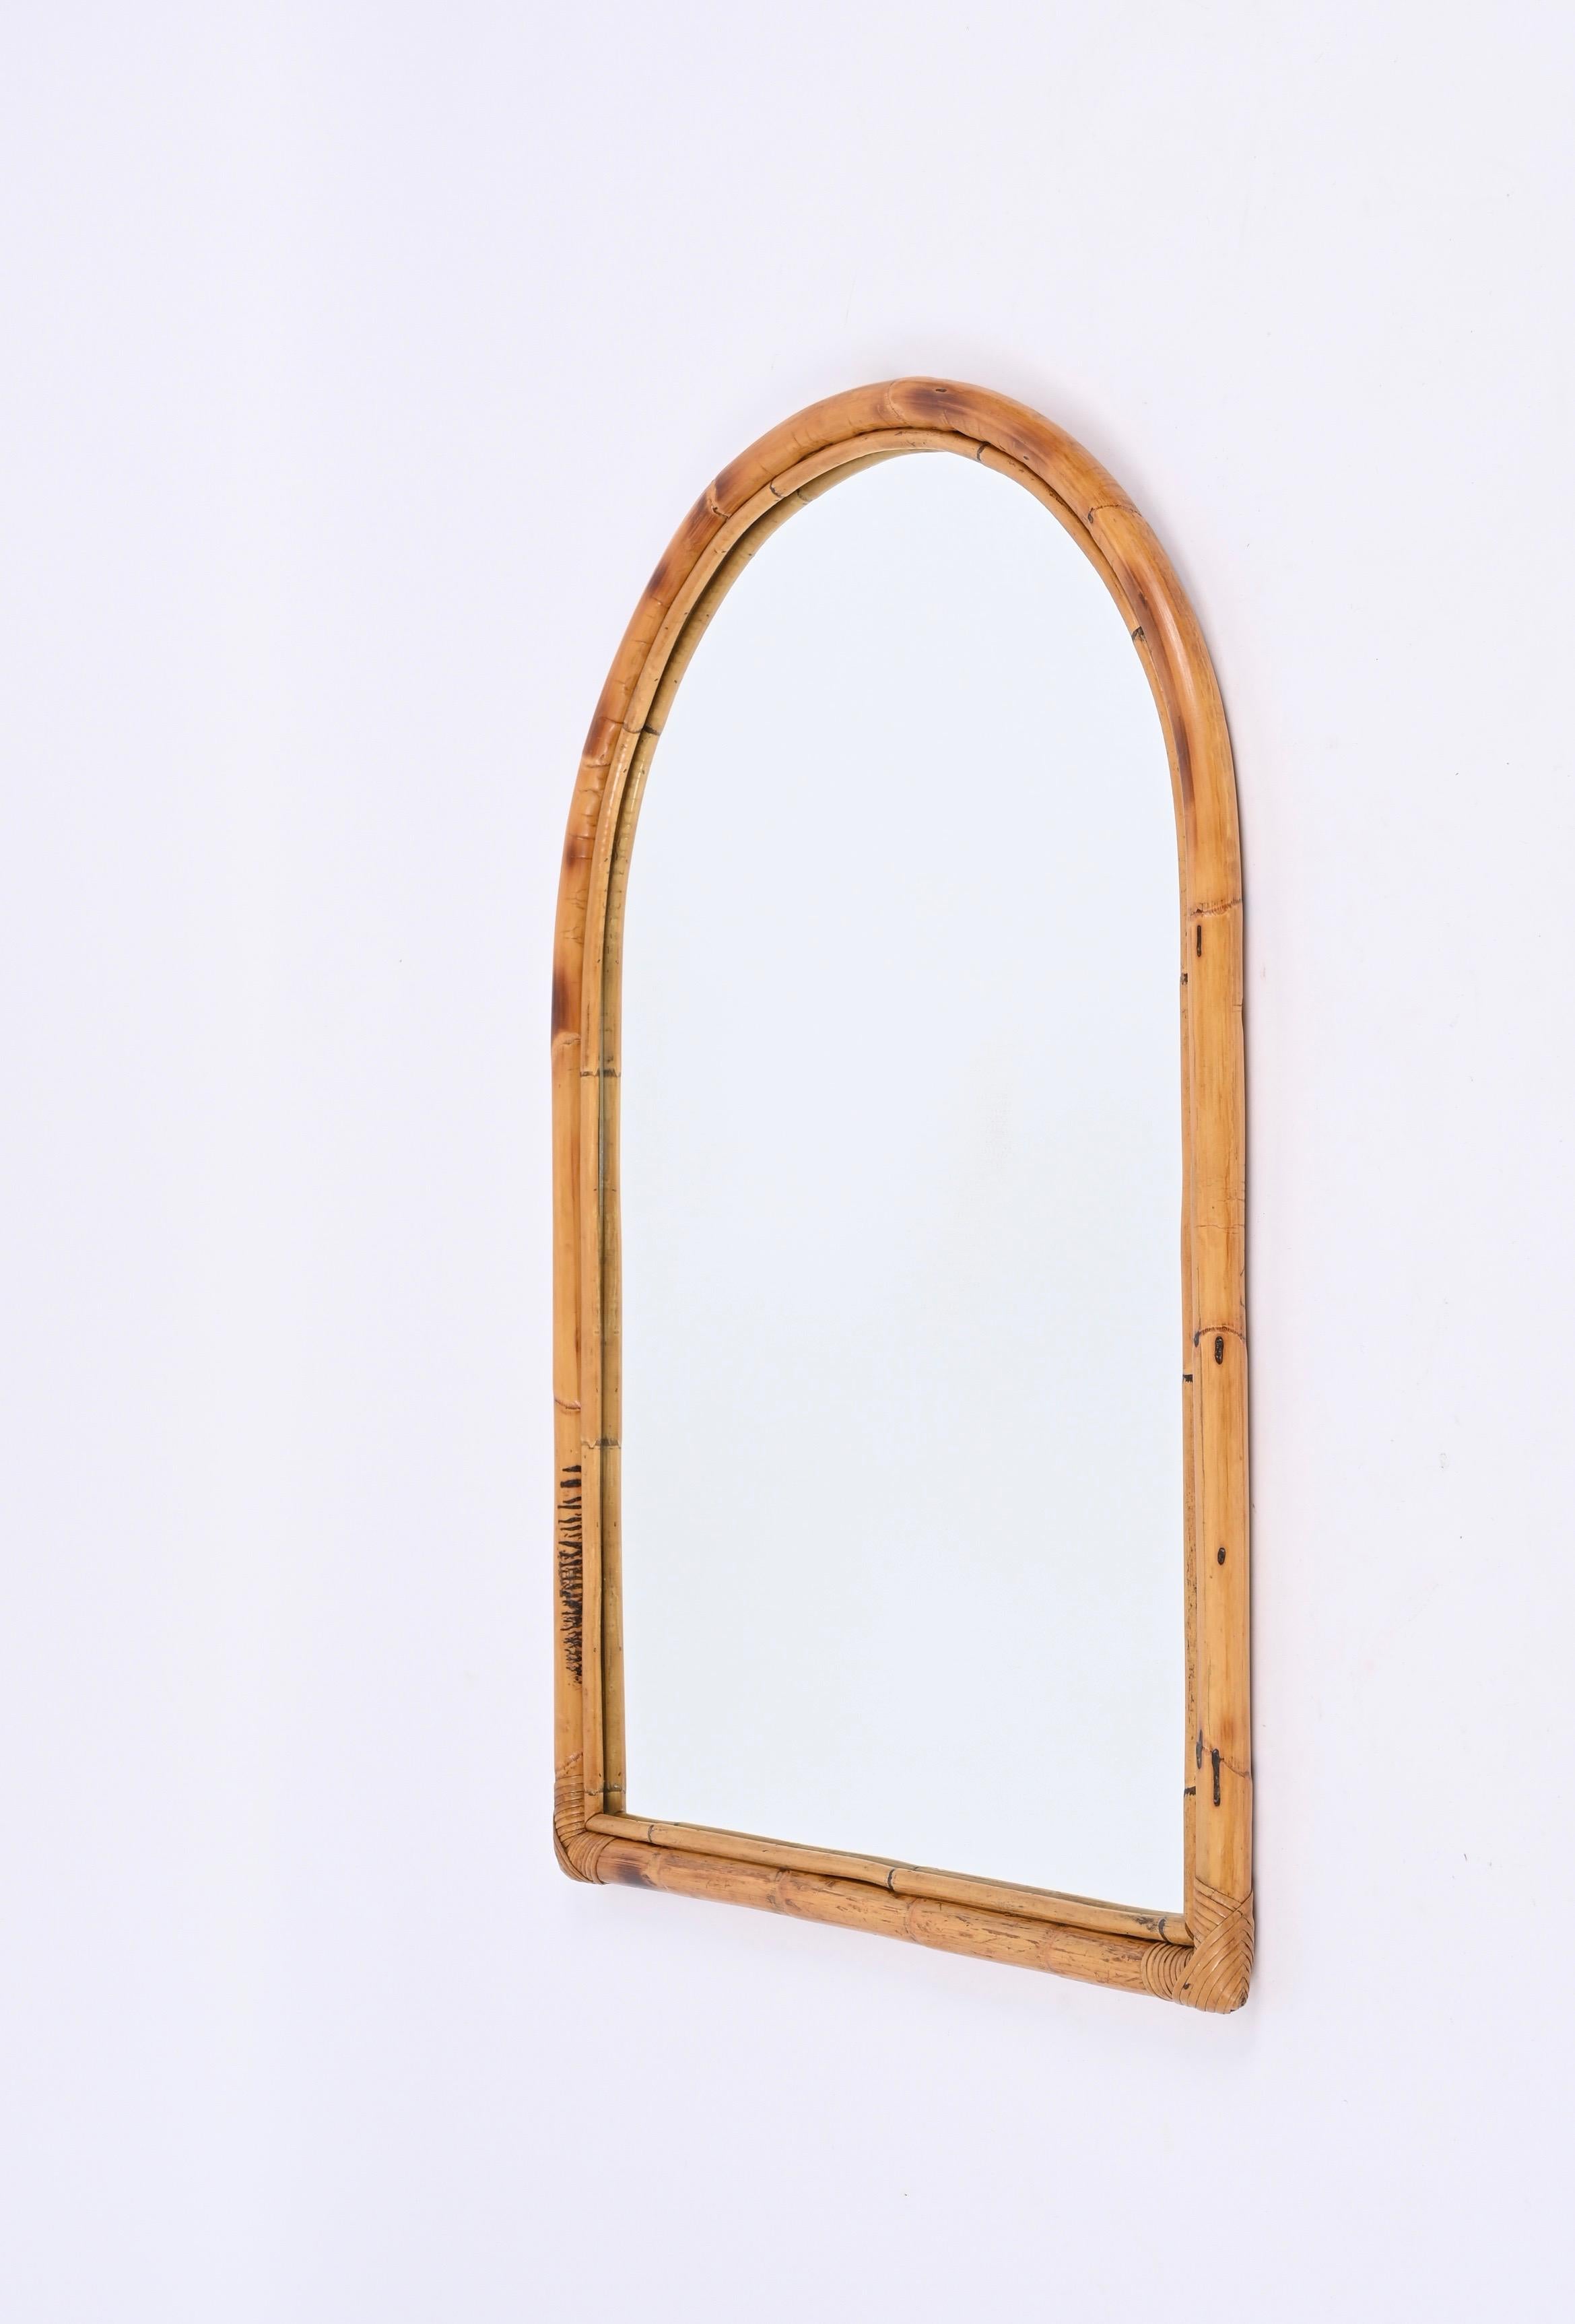 Midcentury Italian Arch Mirror with Double Bamboo and Rattan Frame, Italy, 1970s For Sale 9